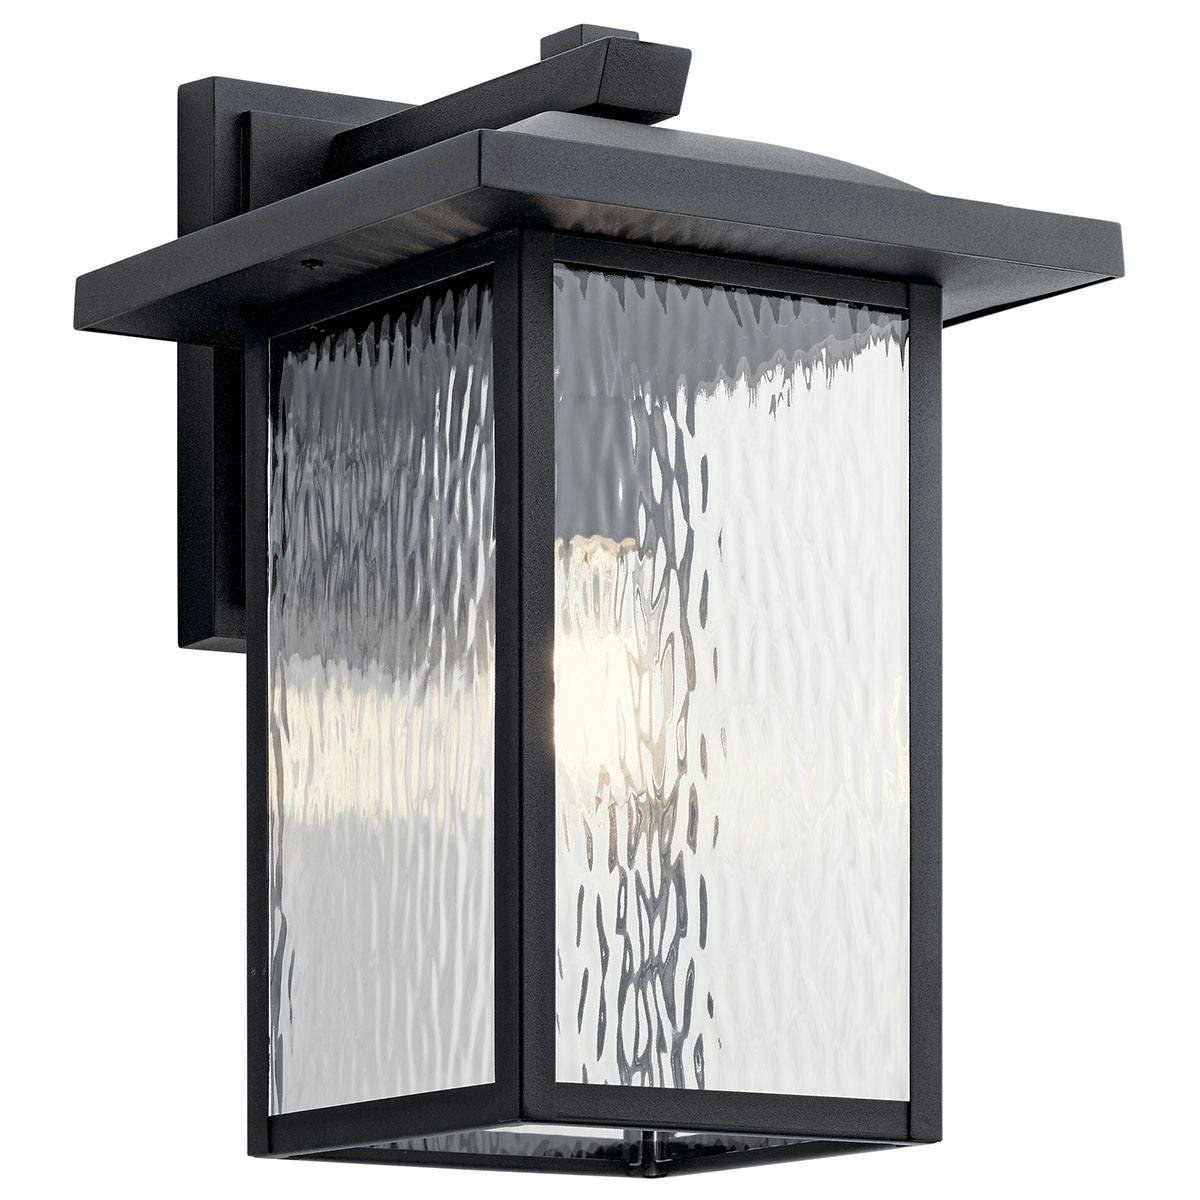 Capanna Wall Light - Water Glass Black on a white background